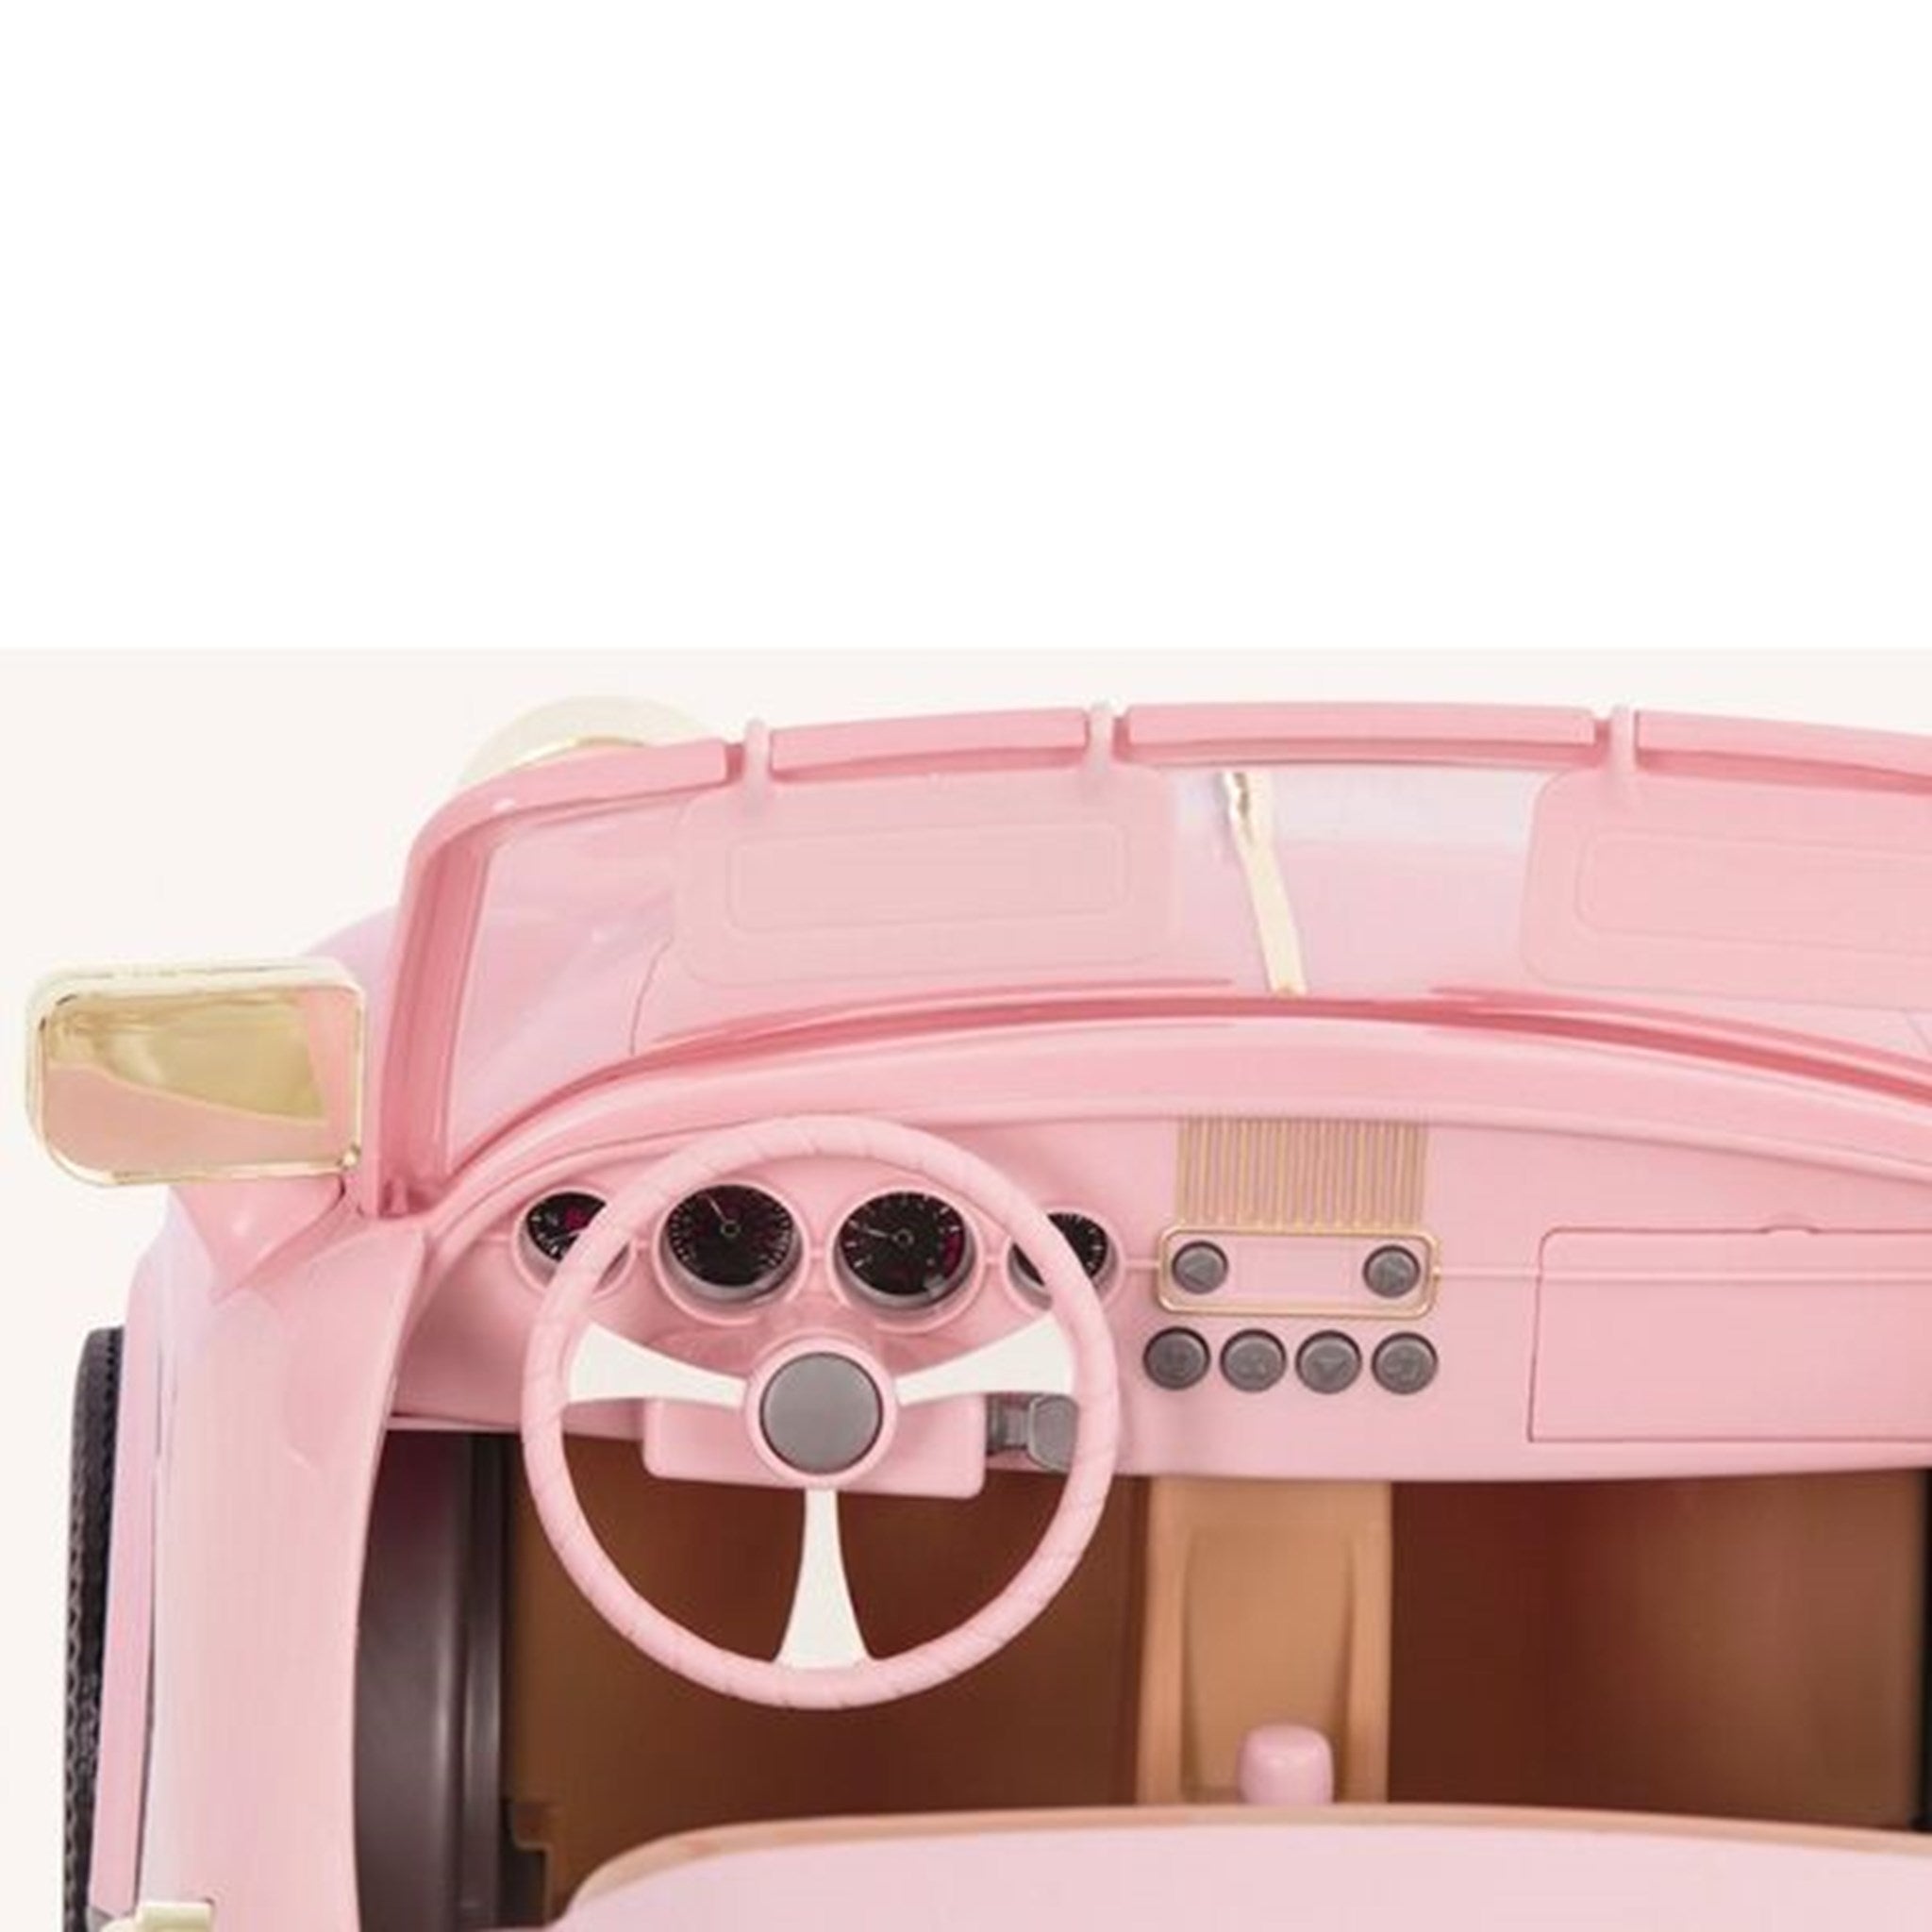 Our Generation Retro Car Pink 3